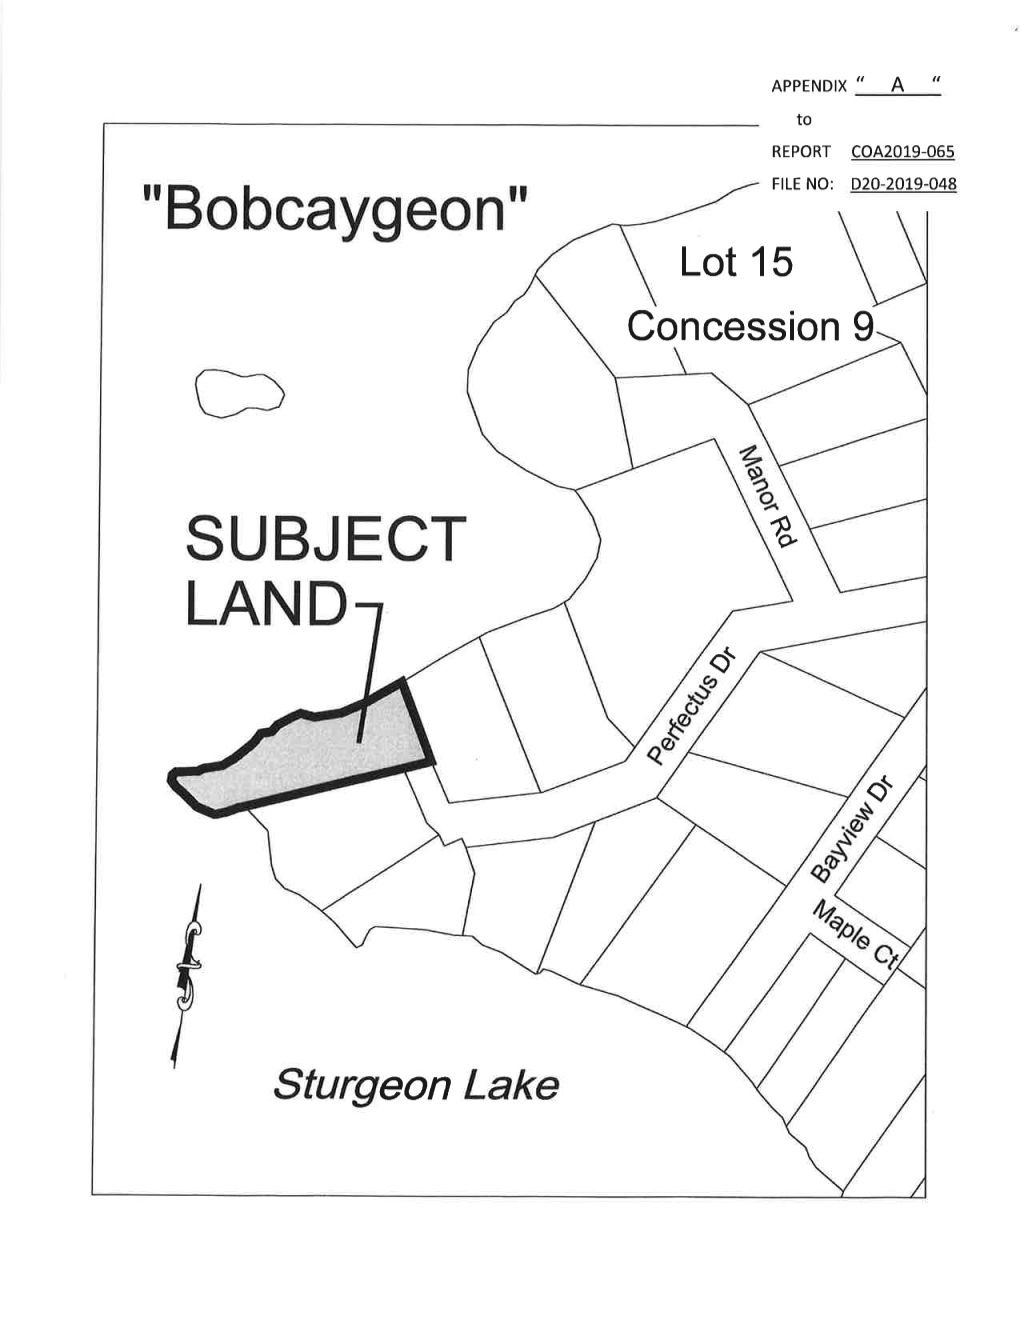 "Bobcaygeon" SUBJECT